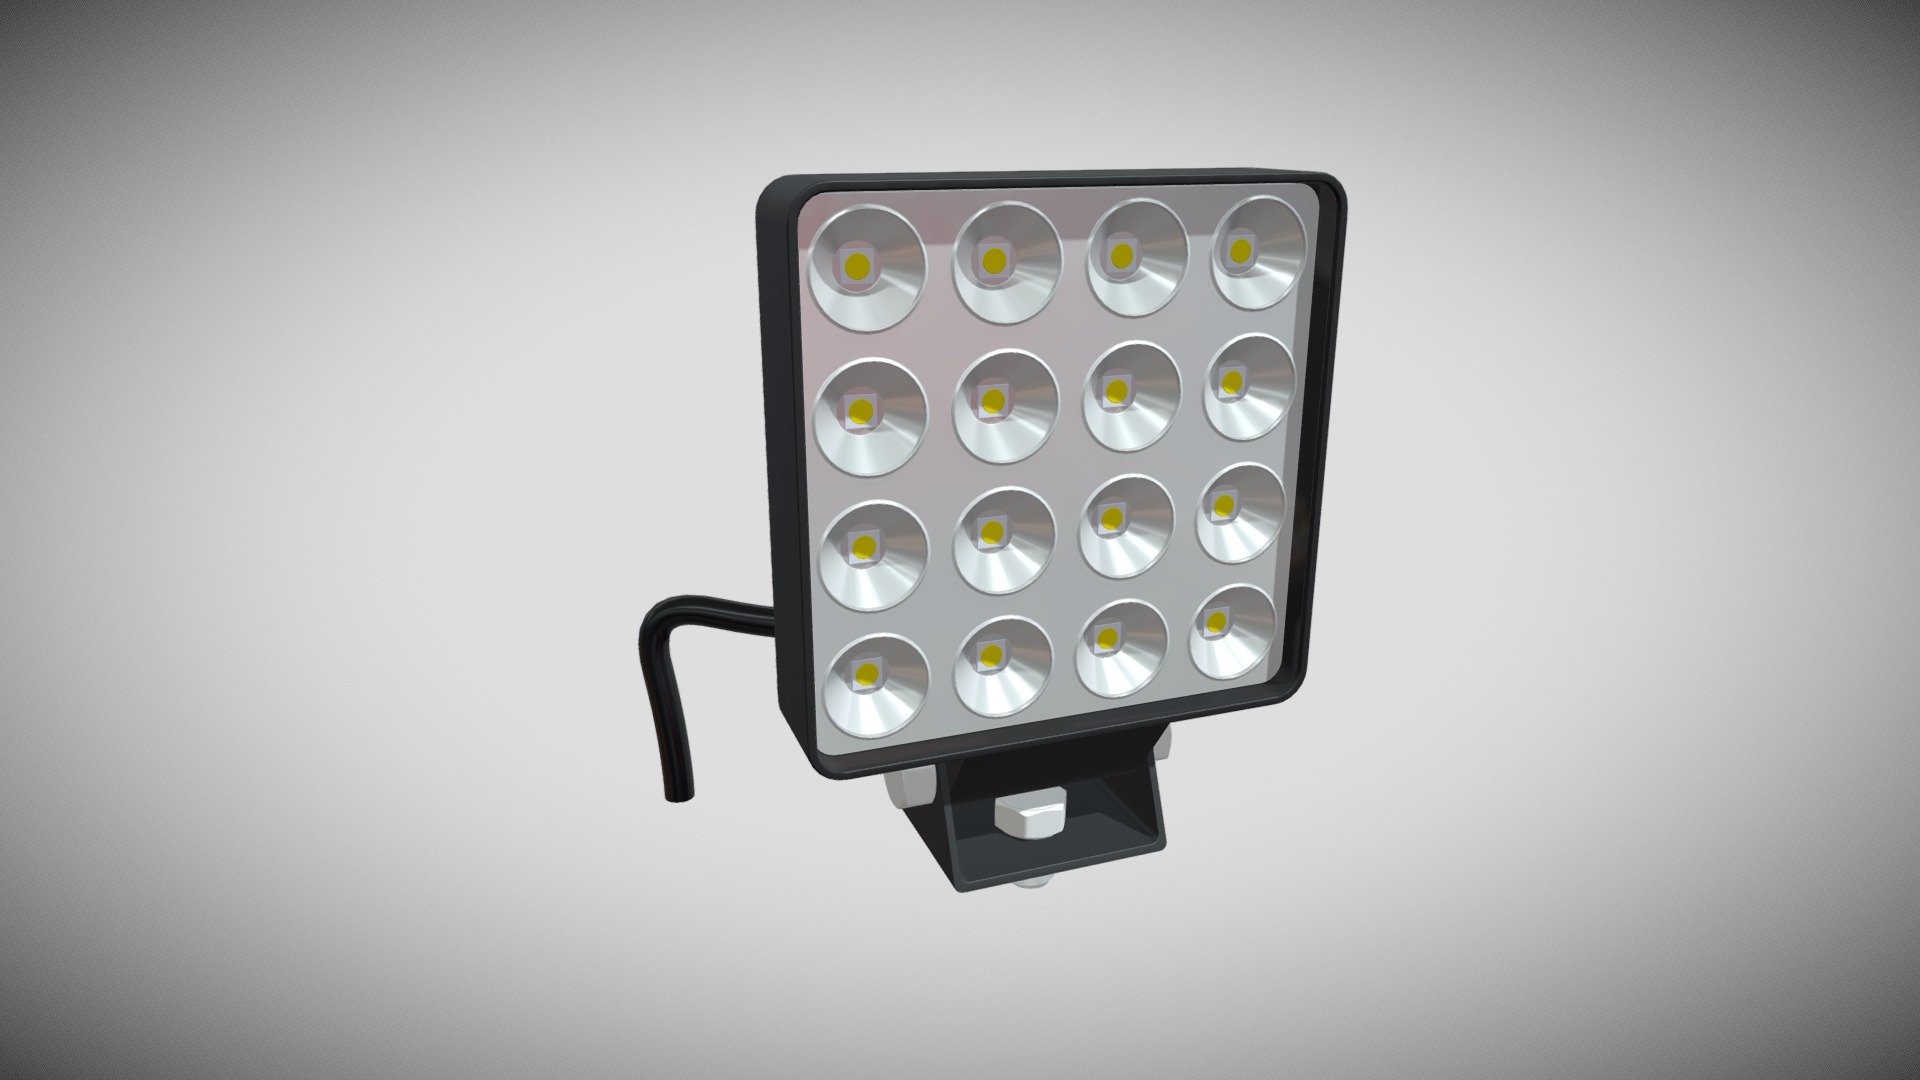 Detailed model of a Small LED Light Bar, modeled in Cinema 4D.The model was created using approximate real world dimensions.

The model has 28,040 polys and 28,085 vertices.

An additional file has been provided containing the original Cinema 4D project files with both standard and v-ray materials and other 3d export files such as 3ds, fbx and obj 3d model